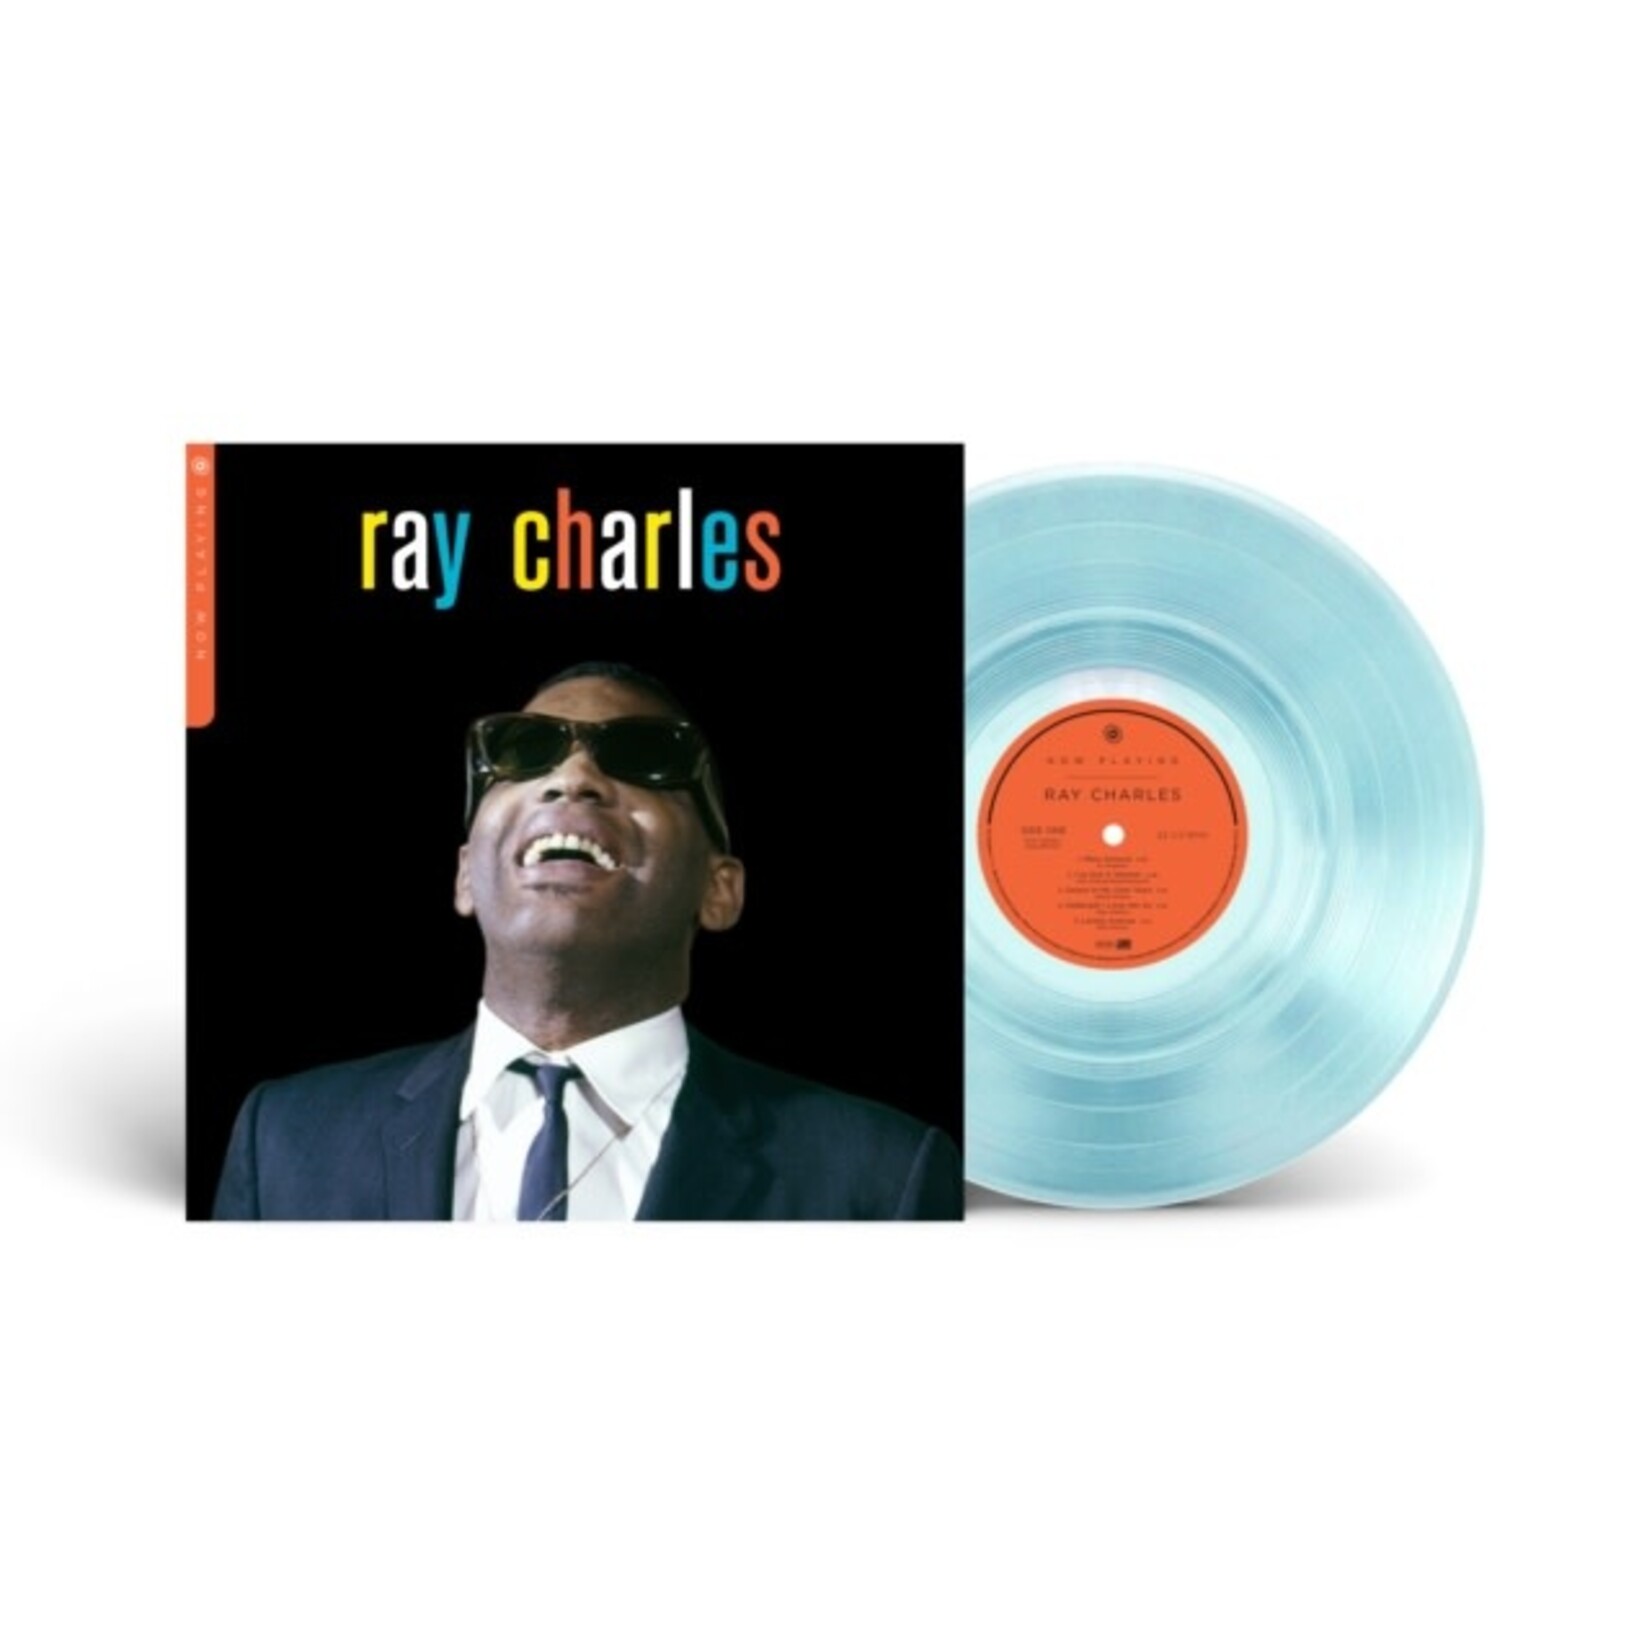 Ray Charles - Now Playing (Blue Vinyl) [LP] (SYEOR24)